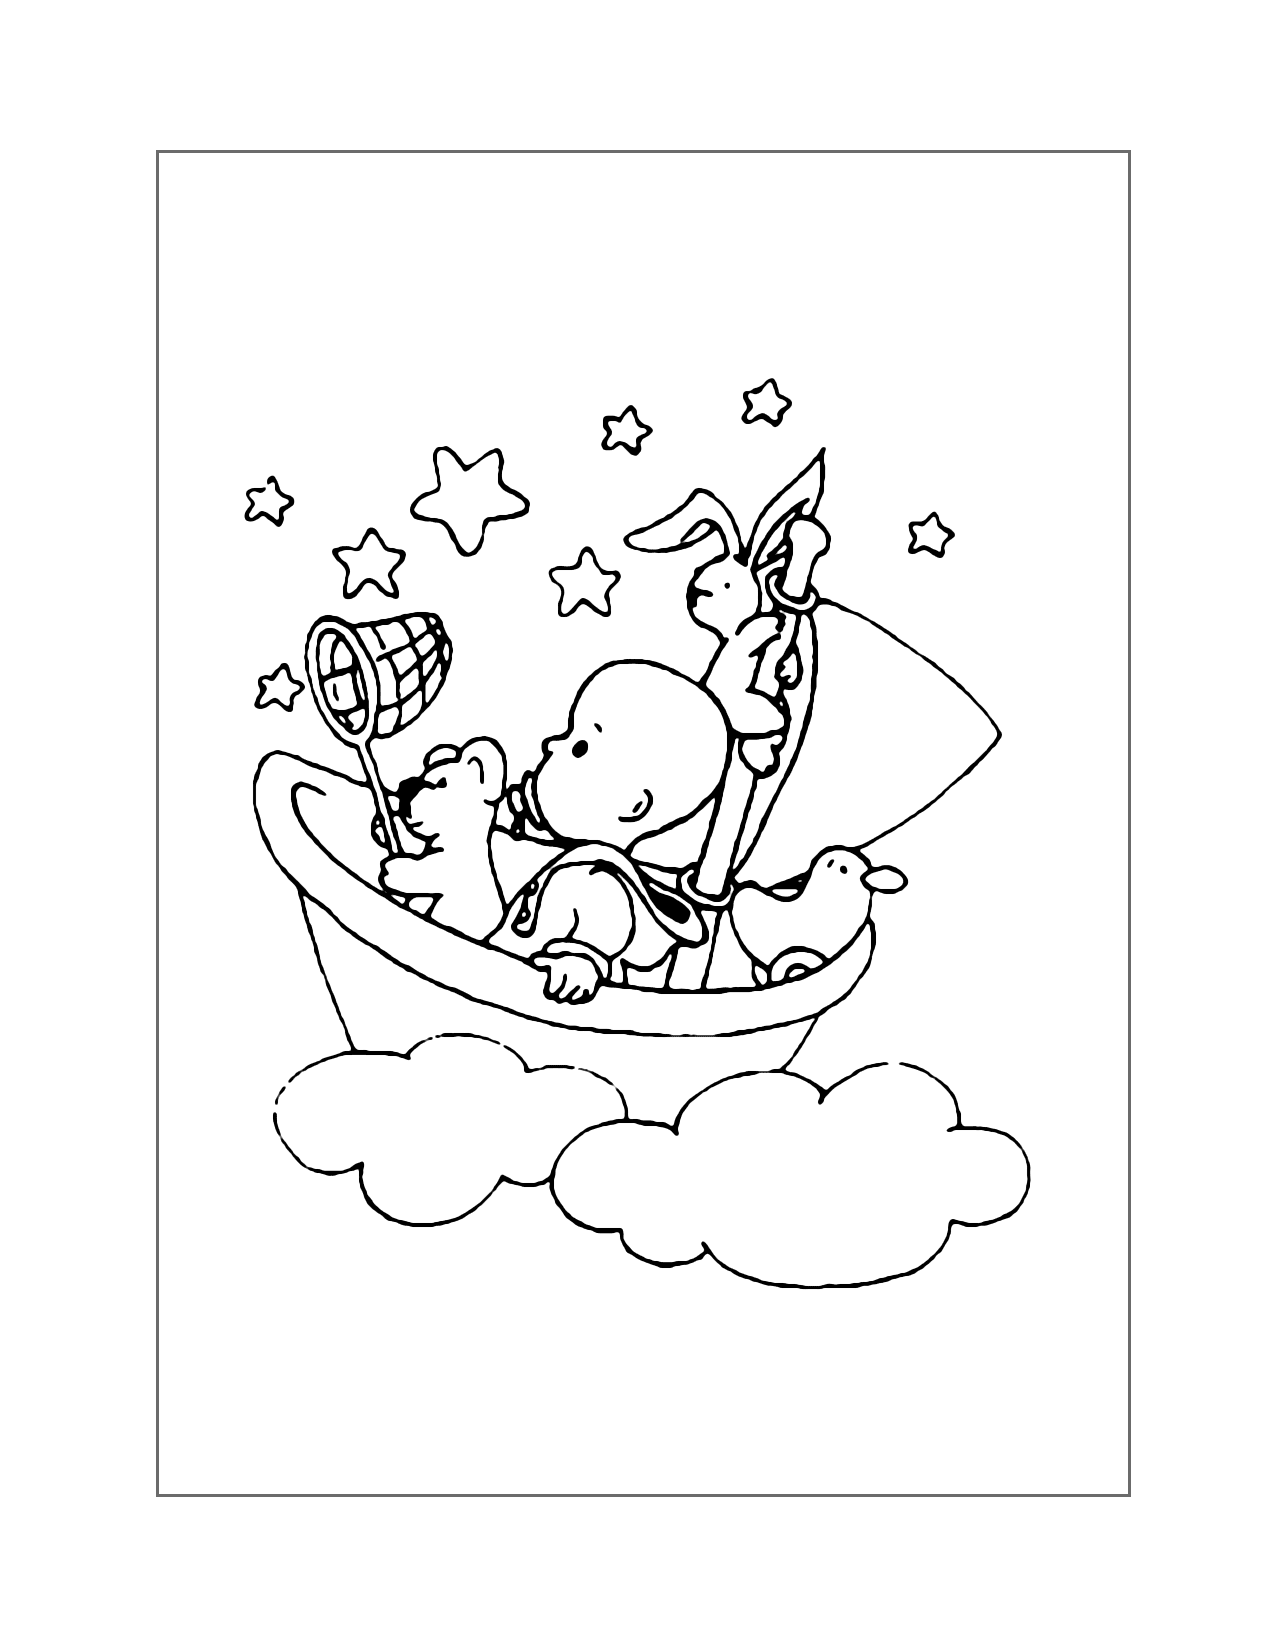 Baby In Bathtub Sailboat With Stuffed Animals Coloring Page